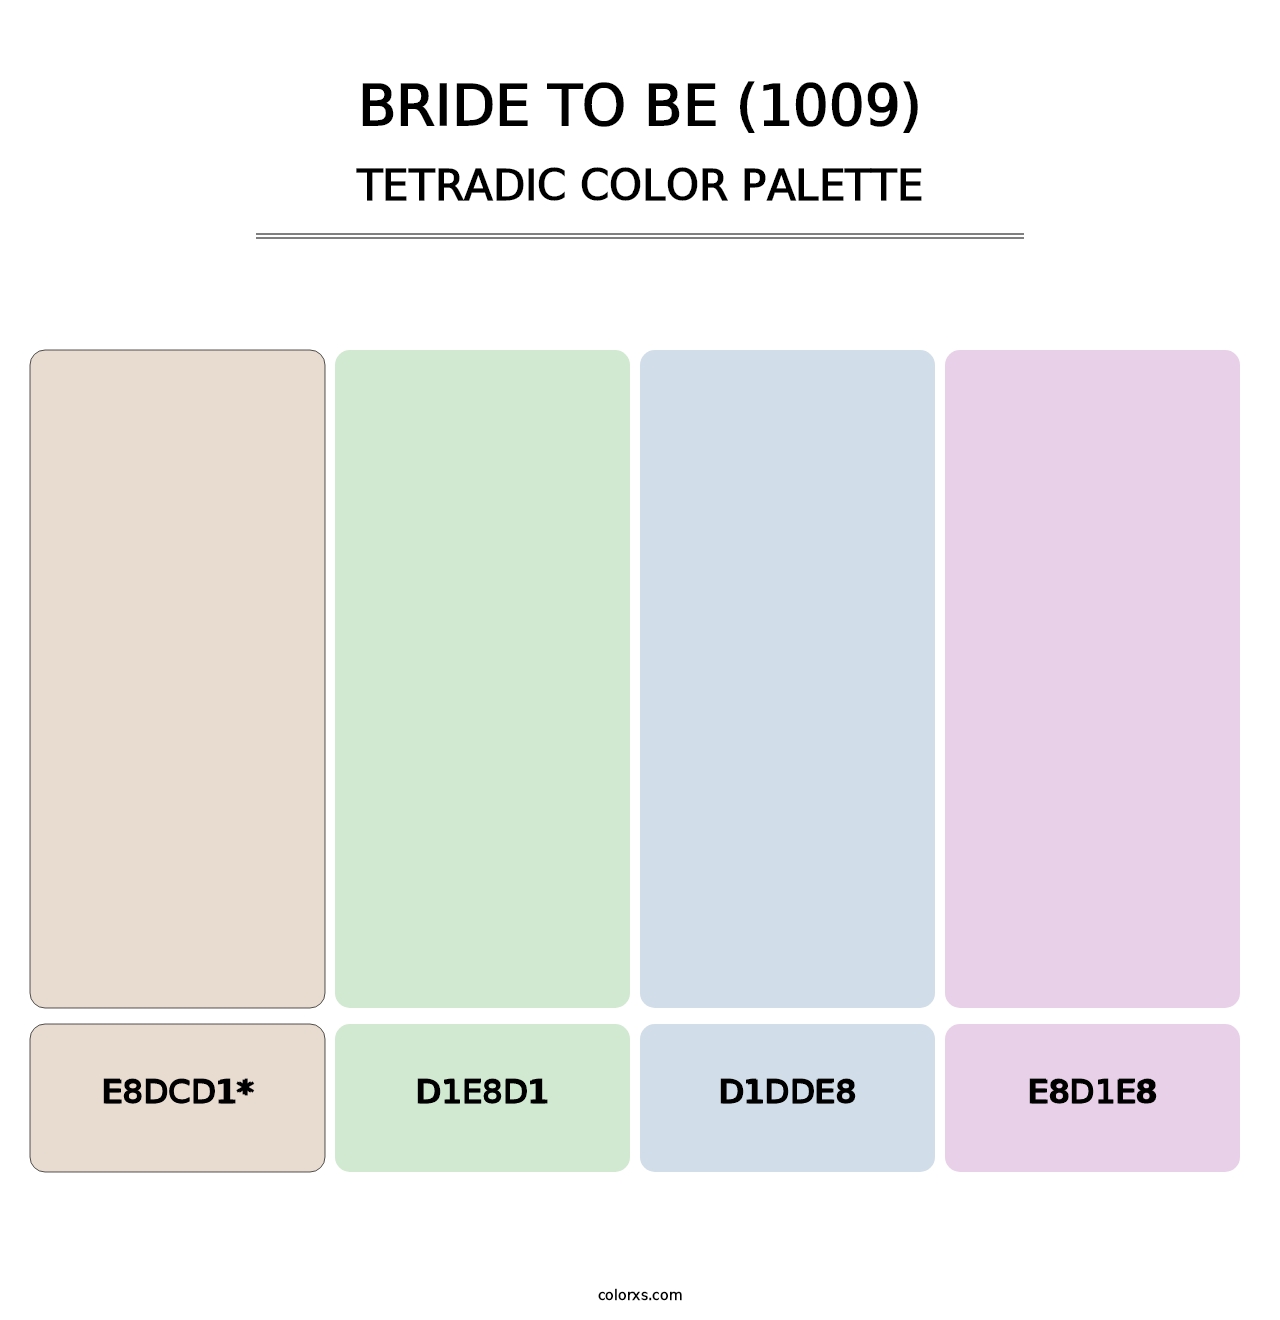 Bride To Be (1009) - Tetradic Color Palette